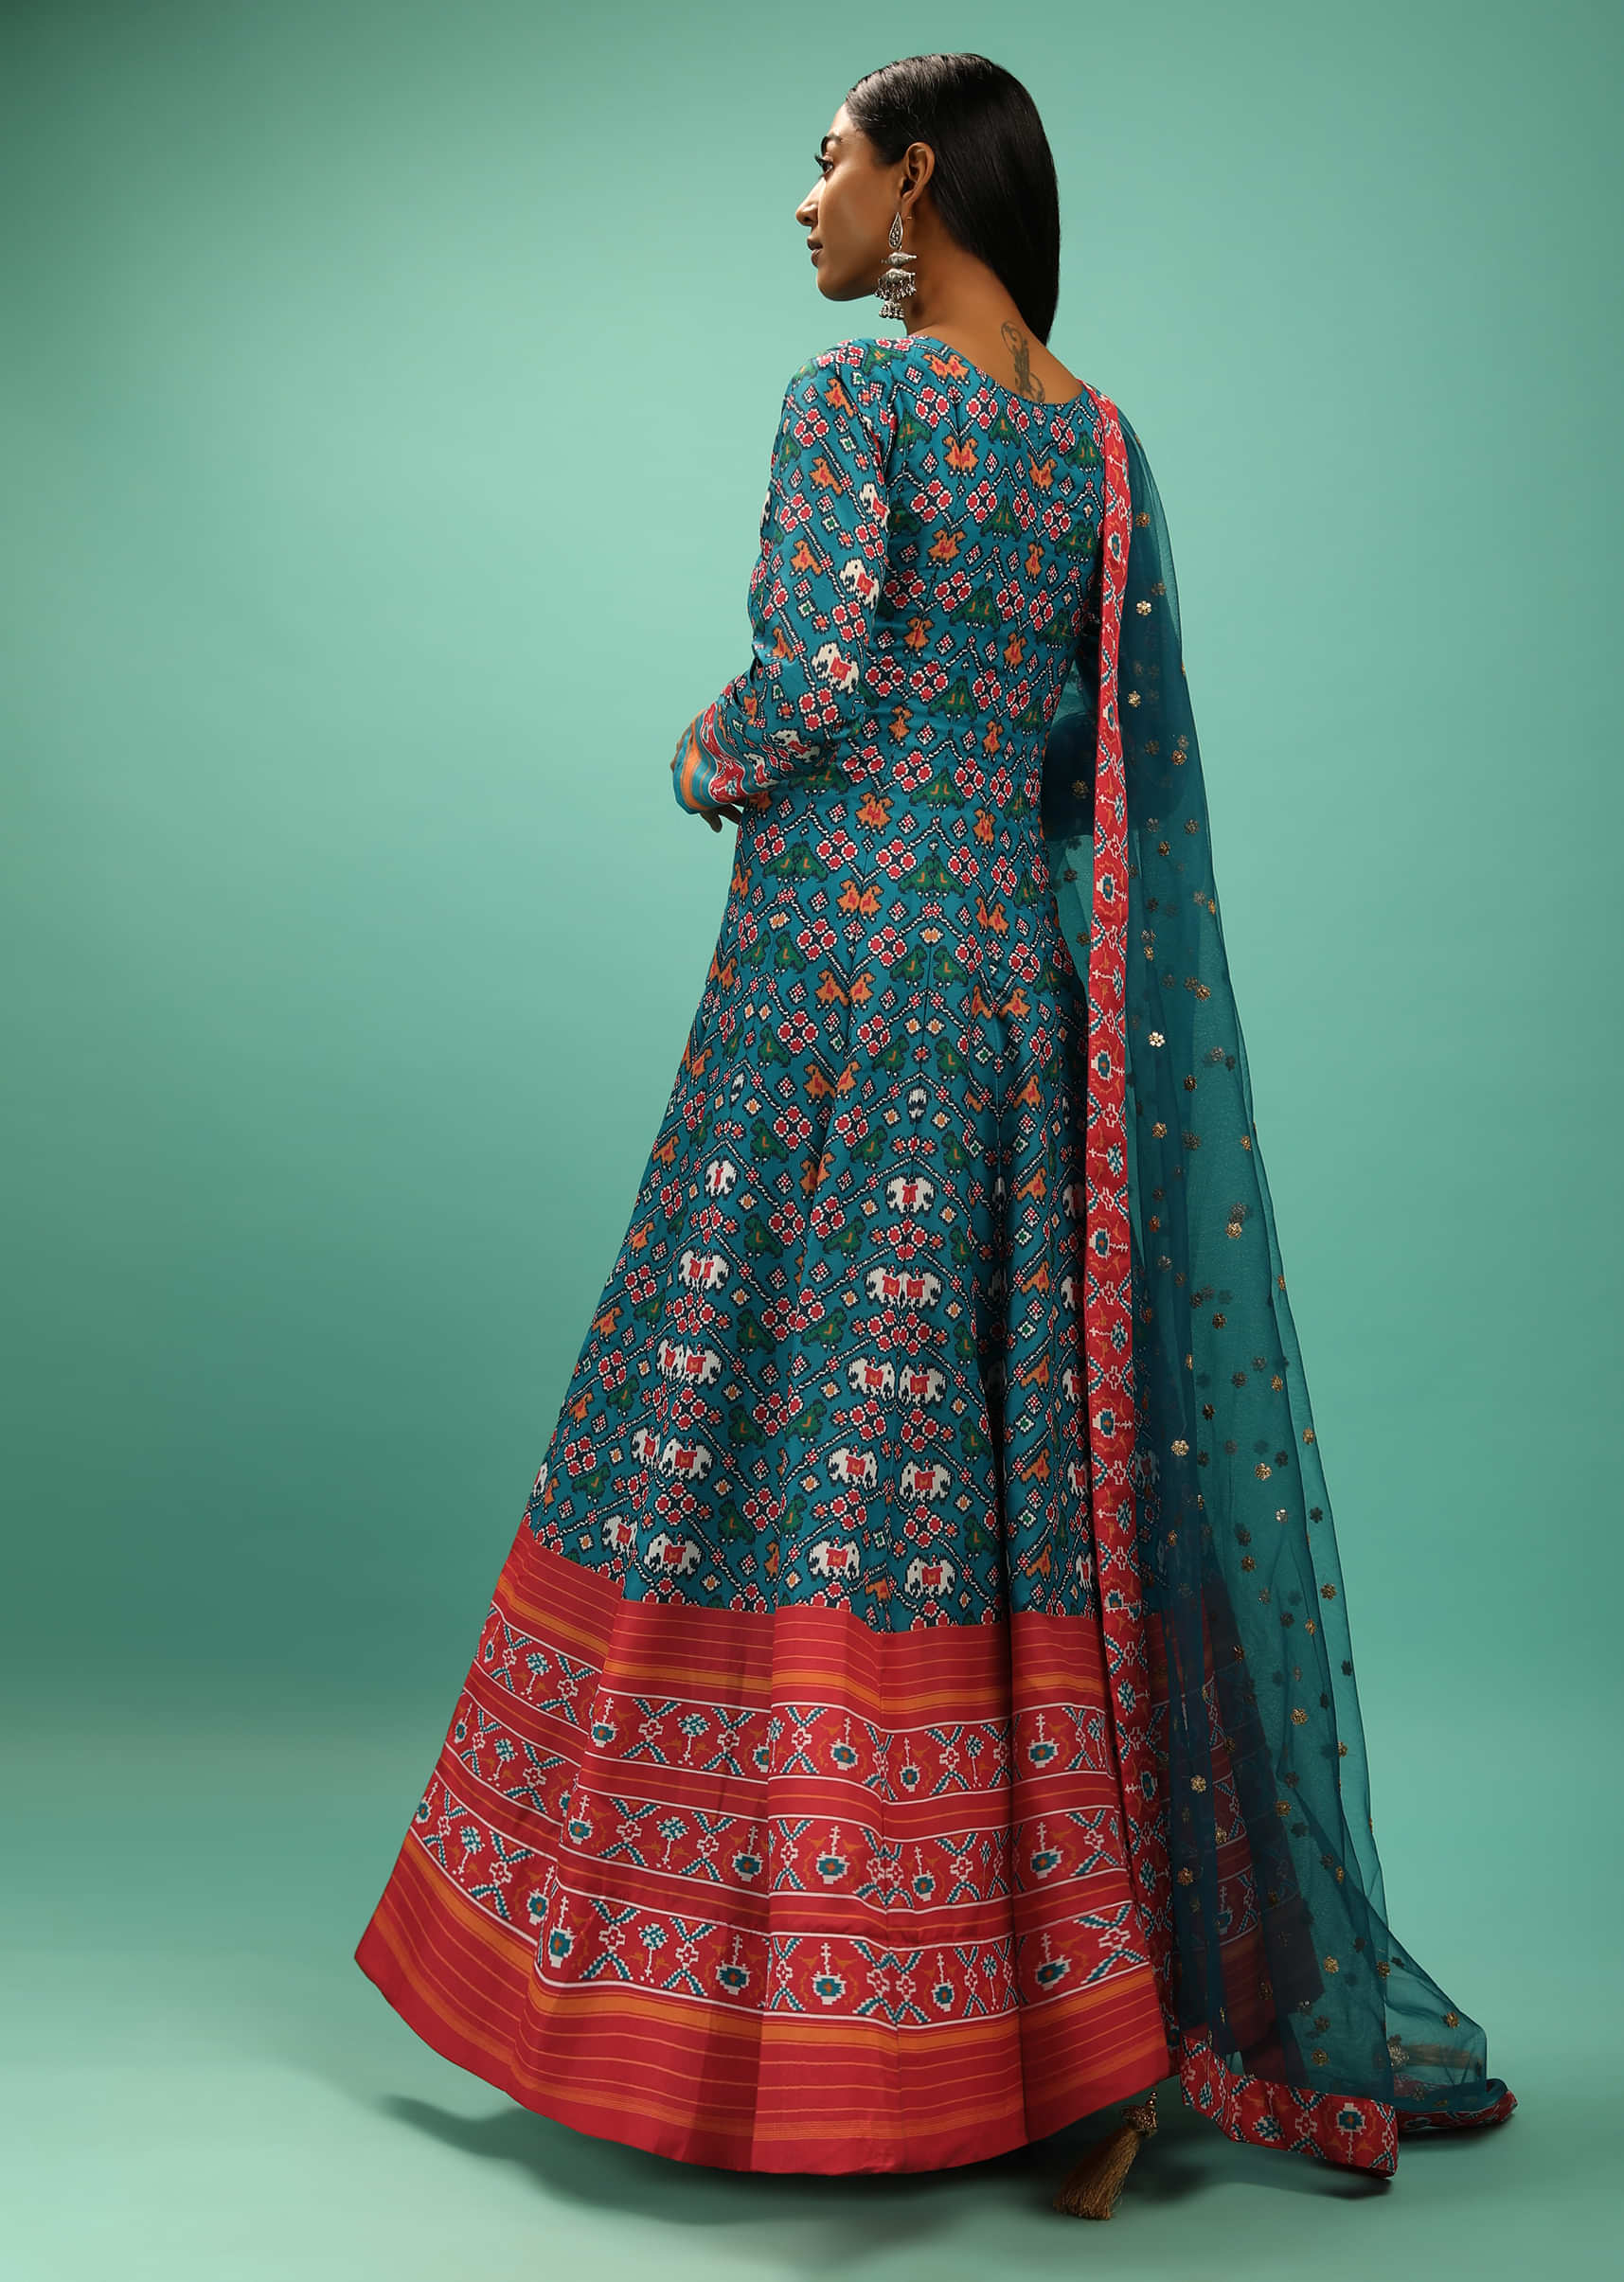 Jewel Blue Anarkali Suit With Multi Colored Patola Print And Zardosi Embroidery  